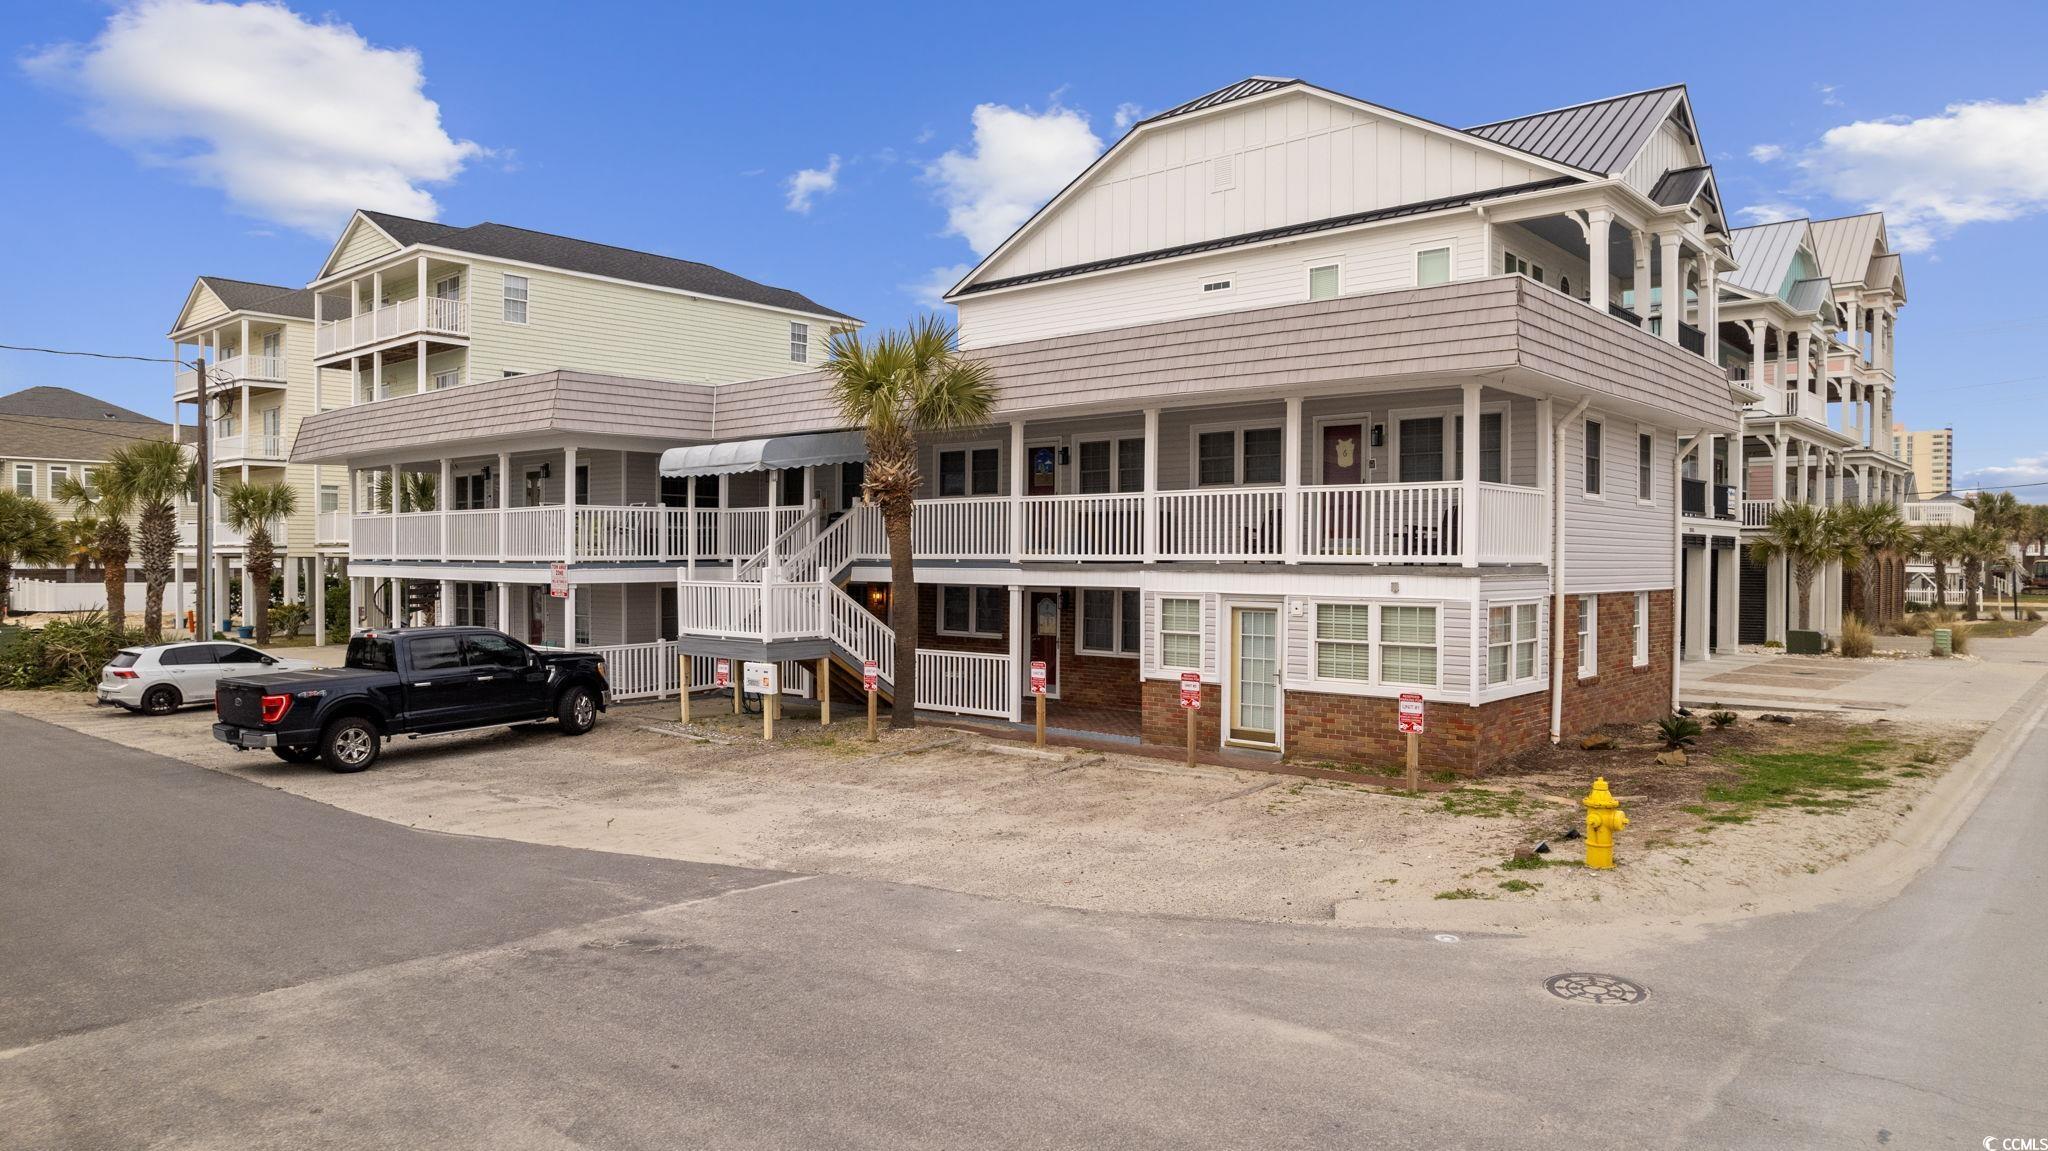 rarely available quiet little beach lovers retreat. just steps to the ocean. this 1st floor condo on the corner of 28th & ocean blvd in prime location of north myrtle beach is a hidden gem. steps to ocean just across the street. fully furnished, just bring your bathing suit. walkable to multiple stores, shops, & restaurants near by.  listen to the ocean waves while you relax and sip your favorite beverage on your spacious covered porch or cool off in the private cherry bay pool.  ideal vacation getaway, rental or investment. short term rentals allowed. get your little slice of heaven just in time for prime season!!!!